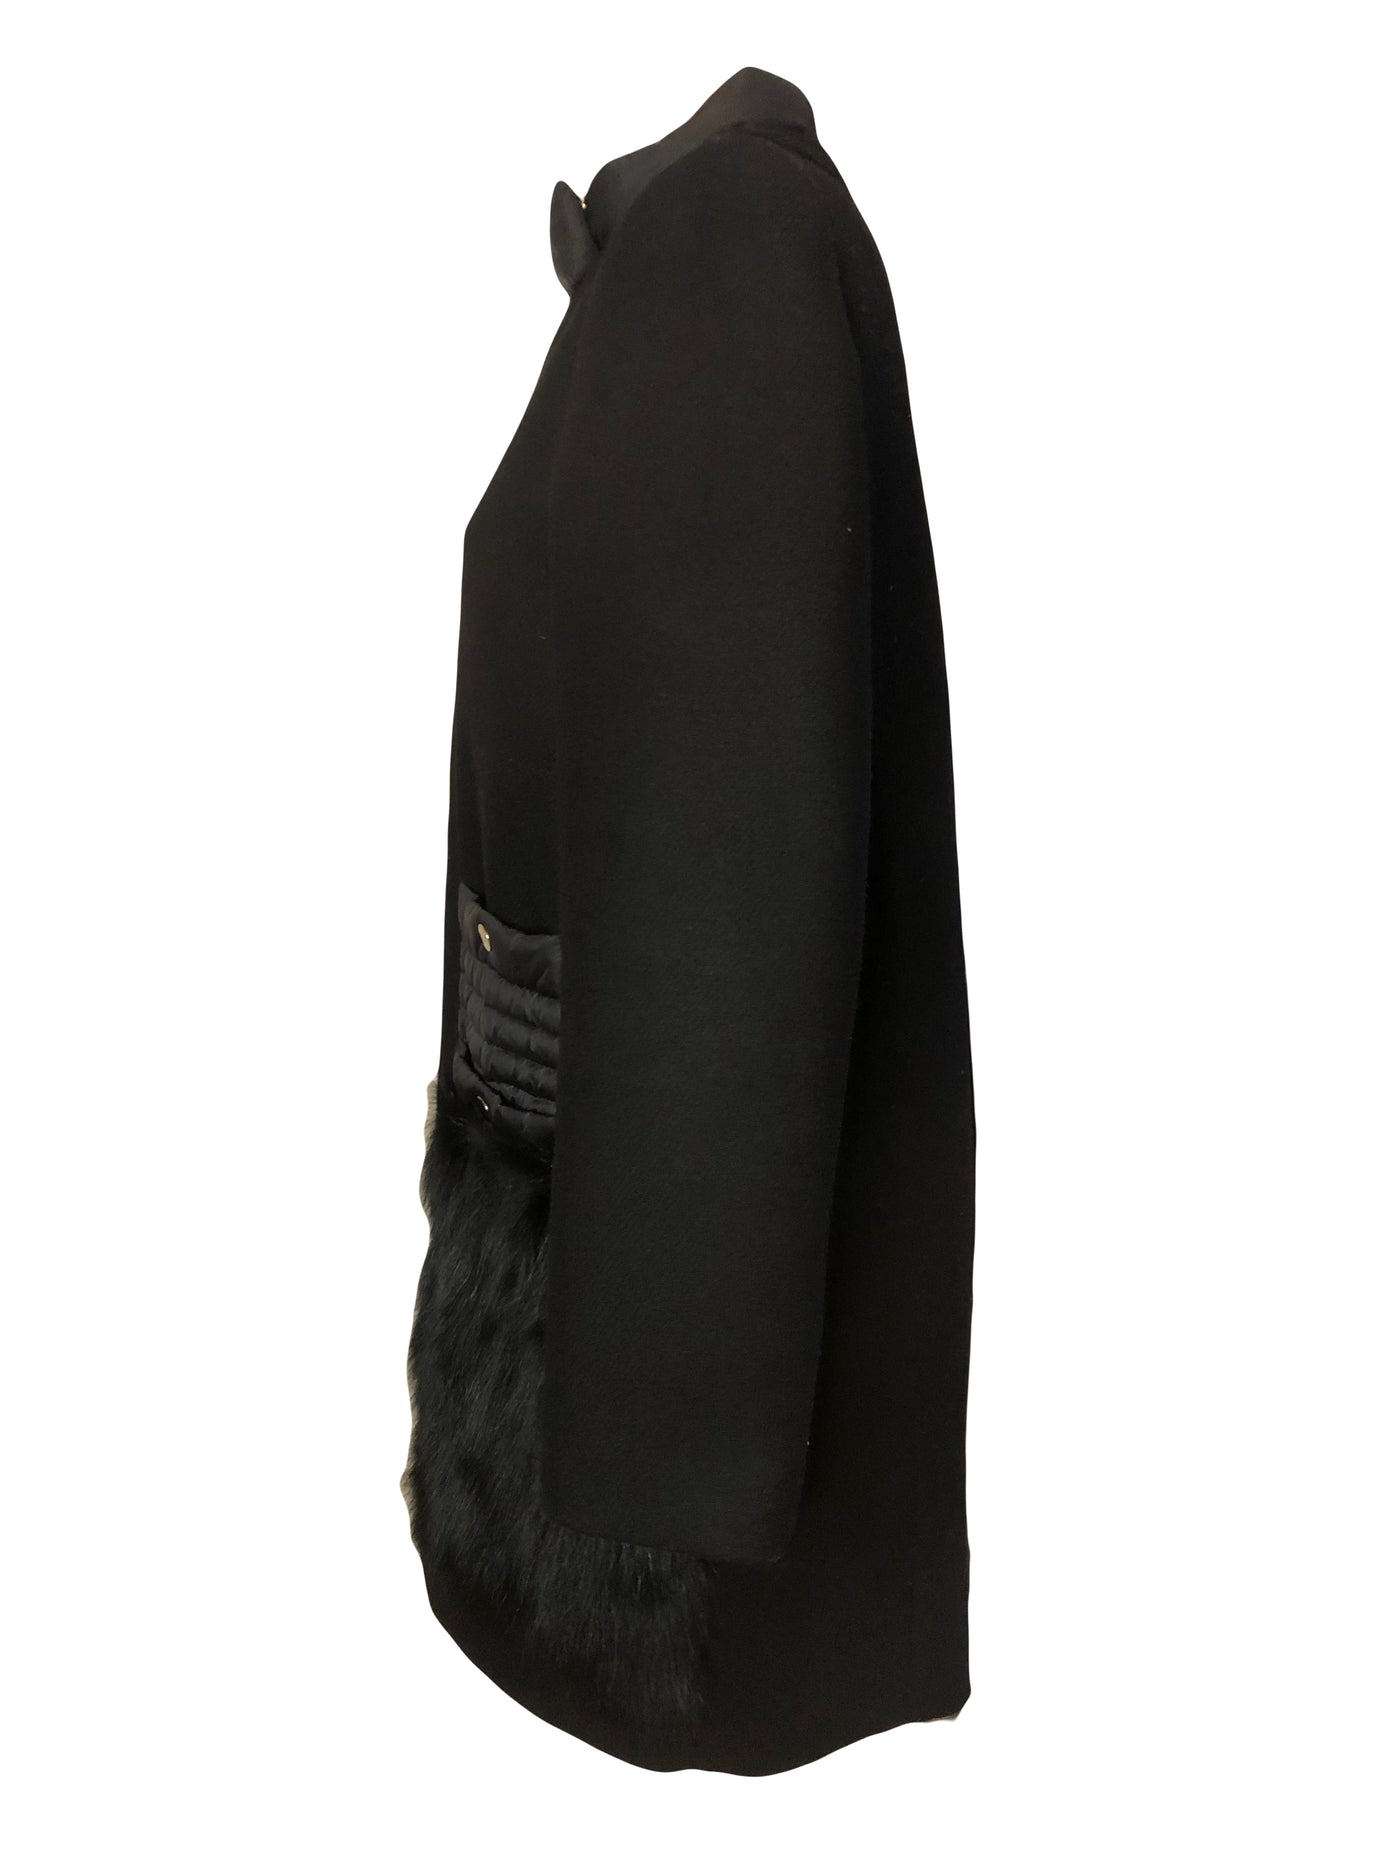 MONCLER Premiere black coat wool and down size 1 RRP: approx. £2000